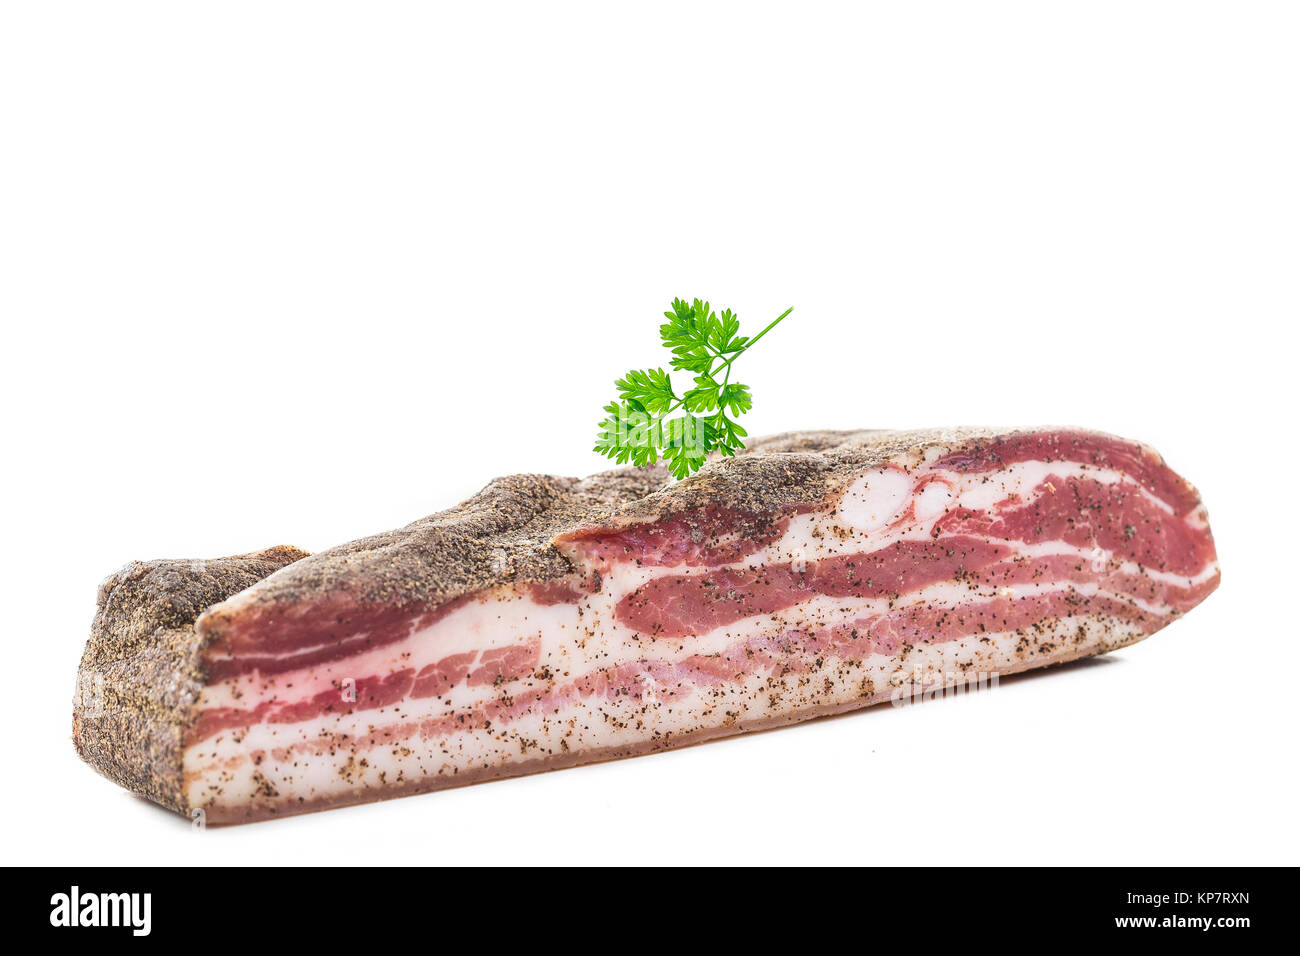 Corsican traditional delicatess smoked piece of pork or boar belly on a white background Stock Photo